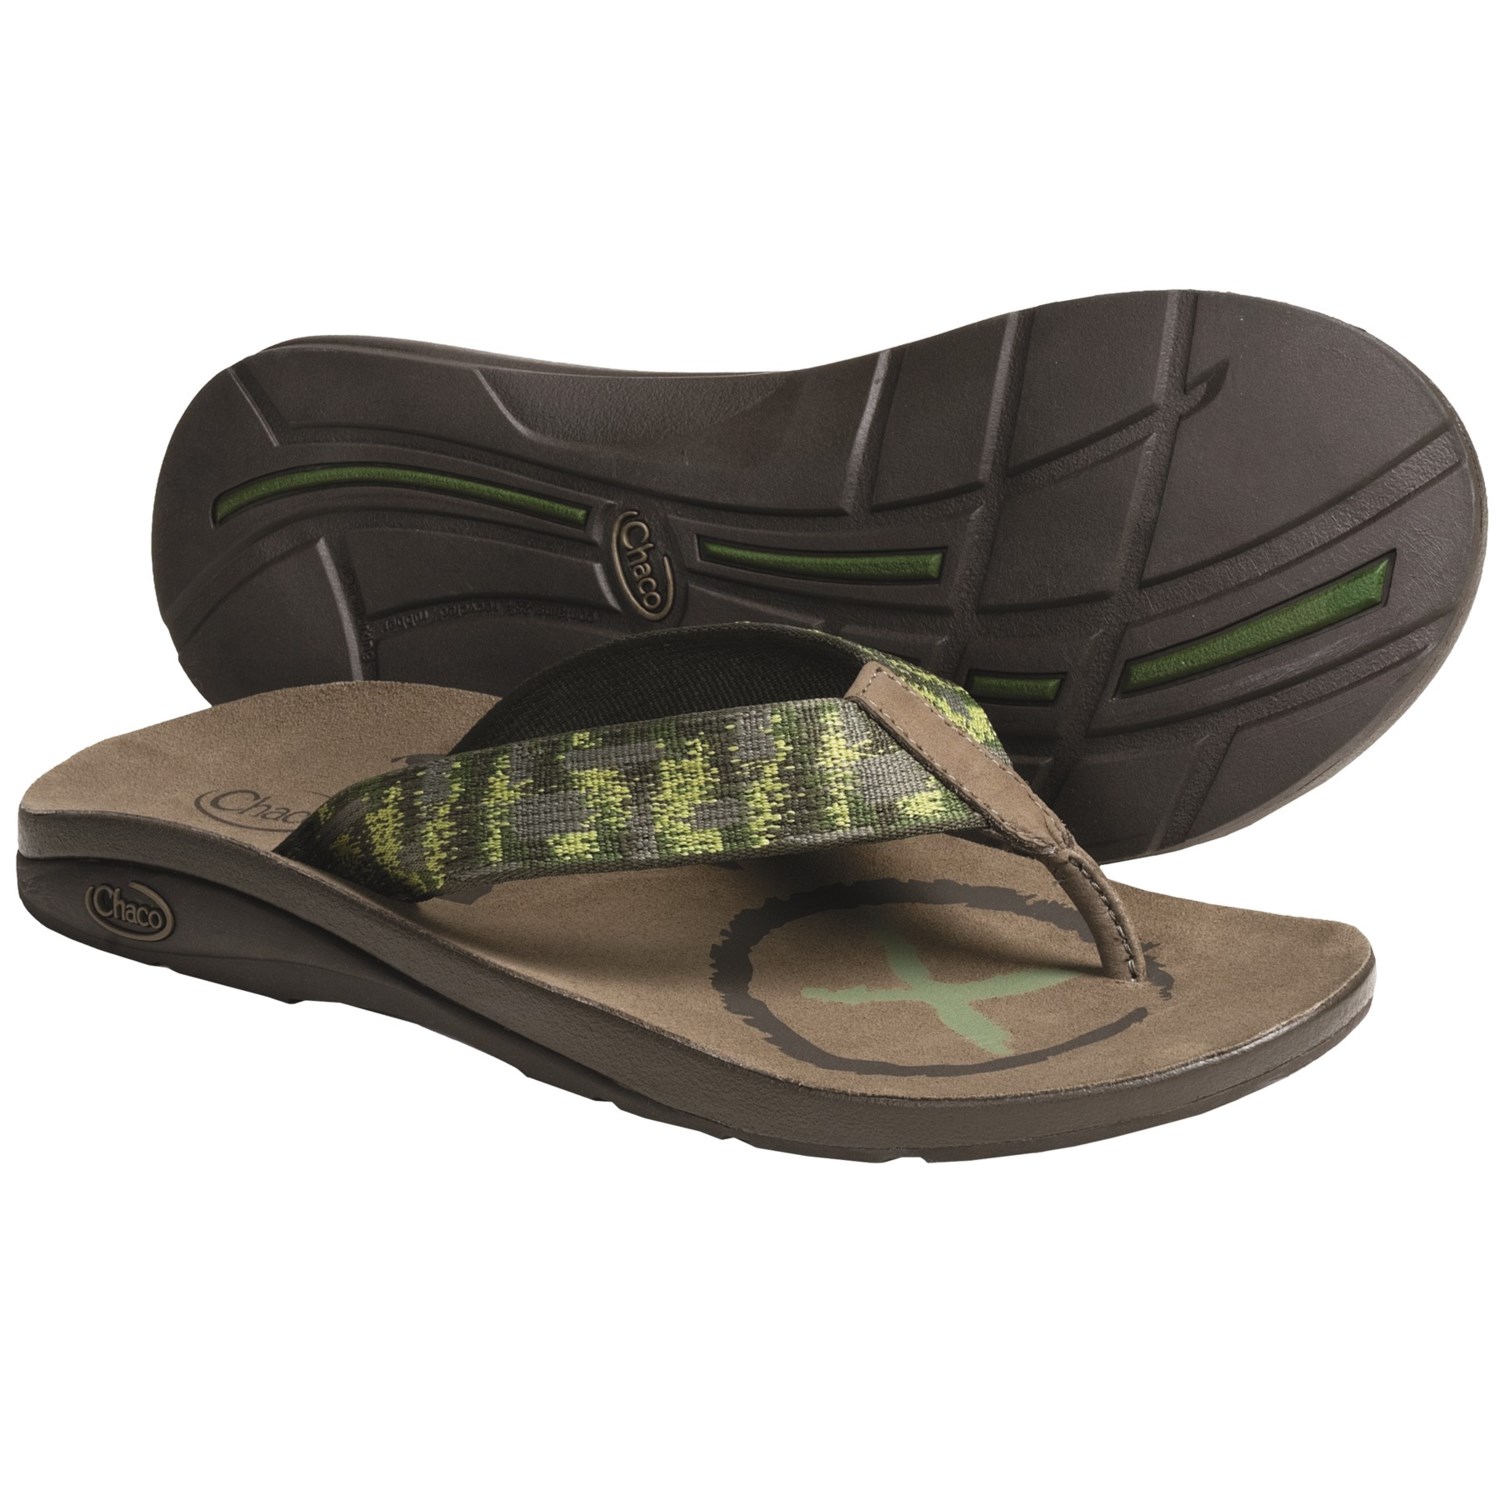 chaco sandals return company information